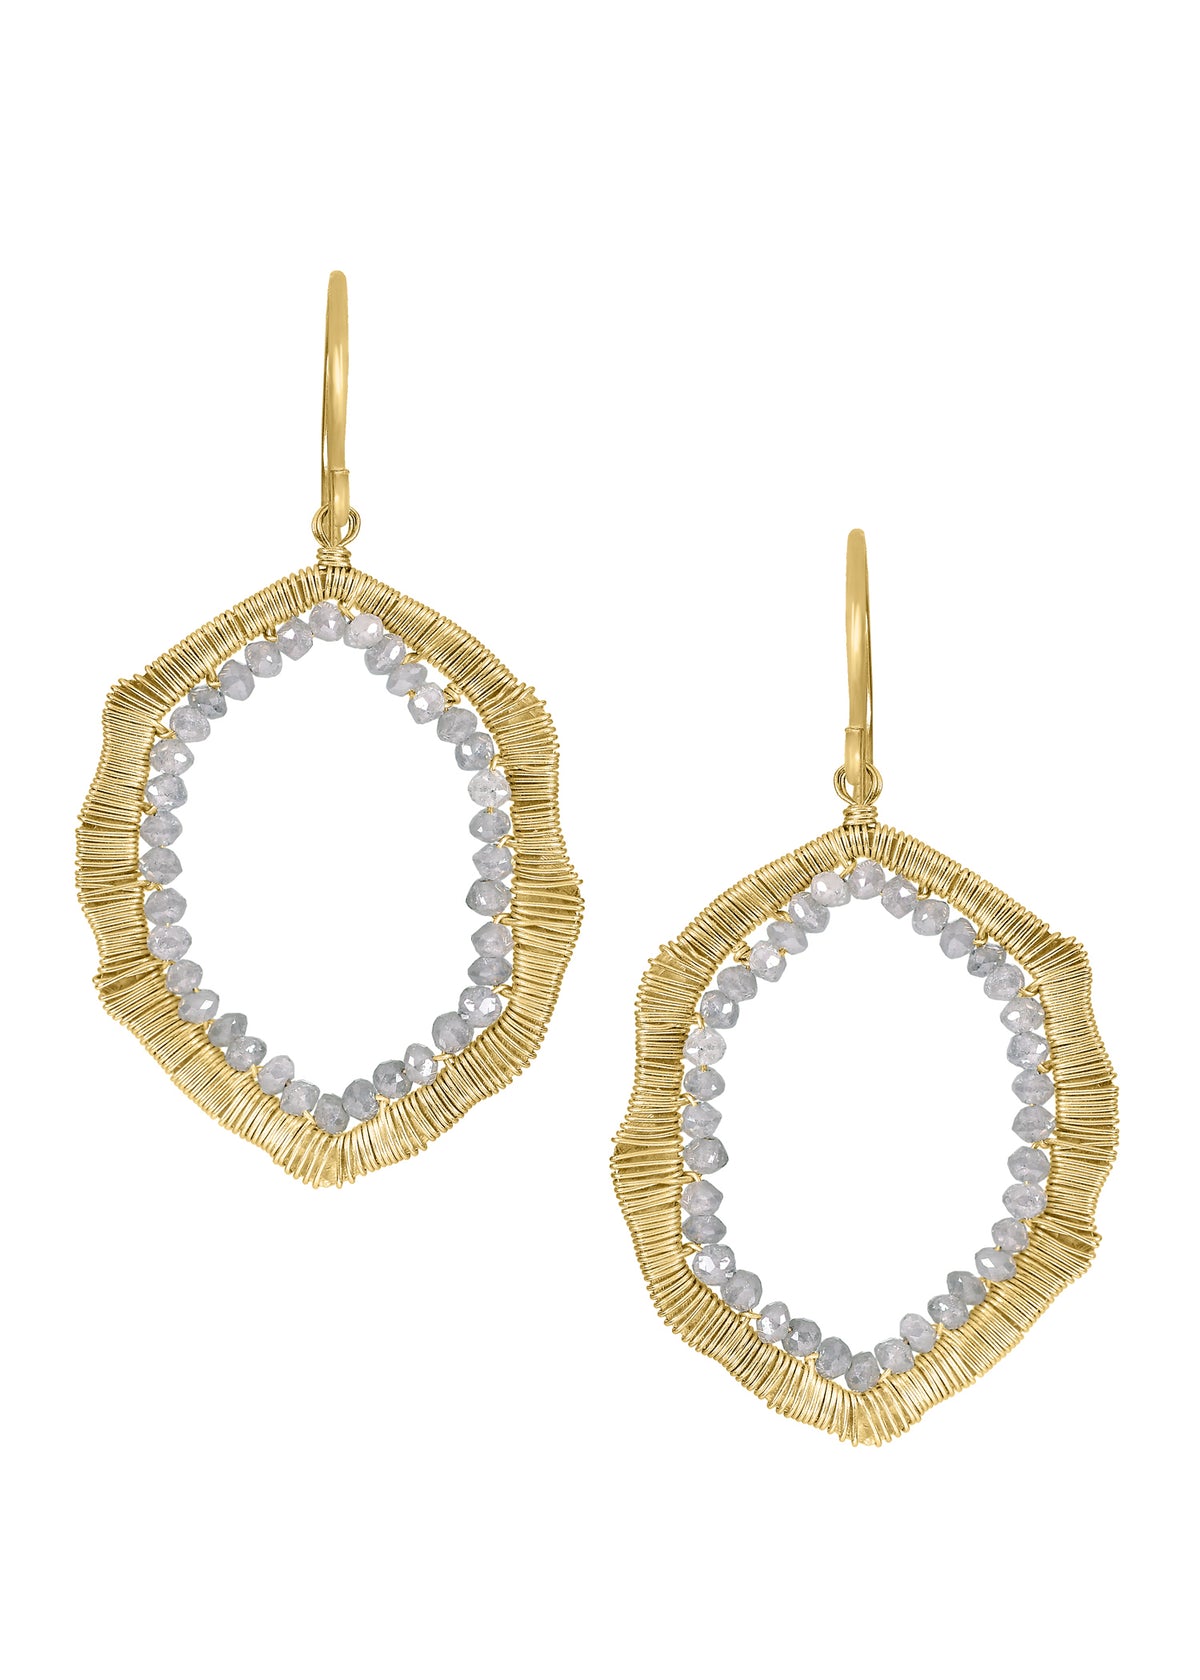 Gray diamonds 14k gold Earrings measure 1-7/8&quot; in length (including the ear wires) and 1&quot; in width at the widest point Handmade in our Los Angeles studio